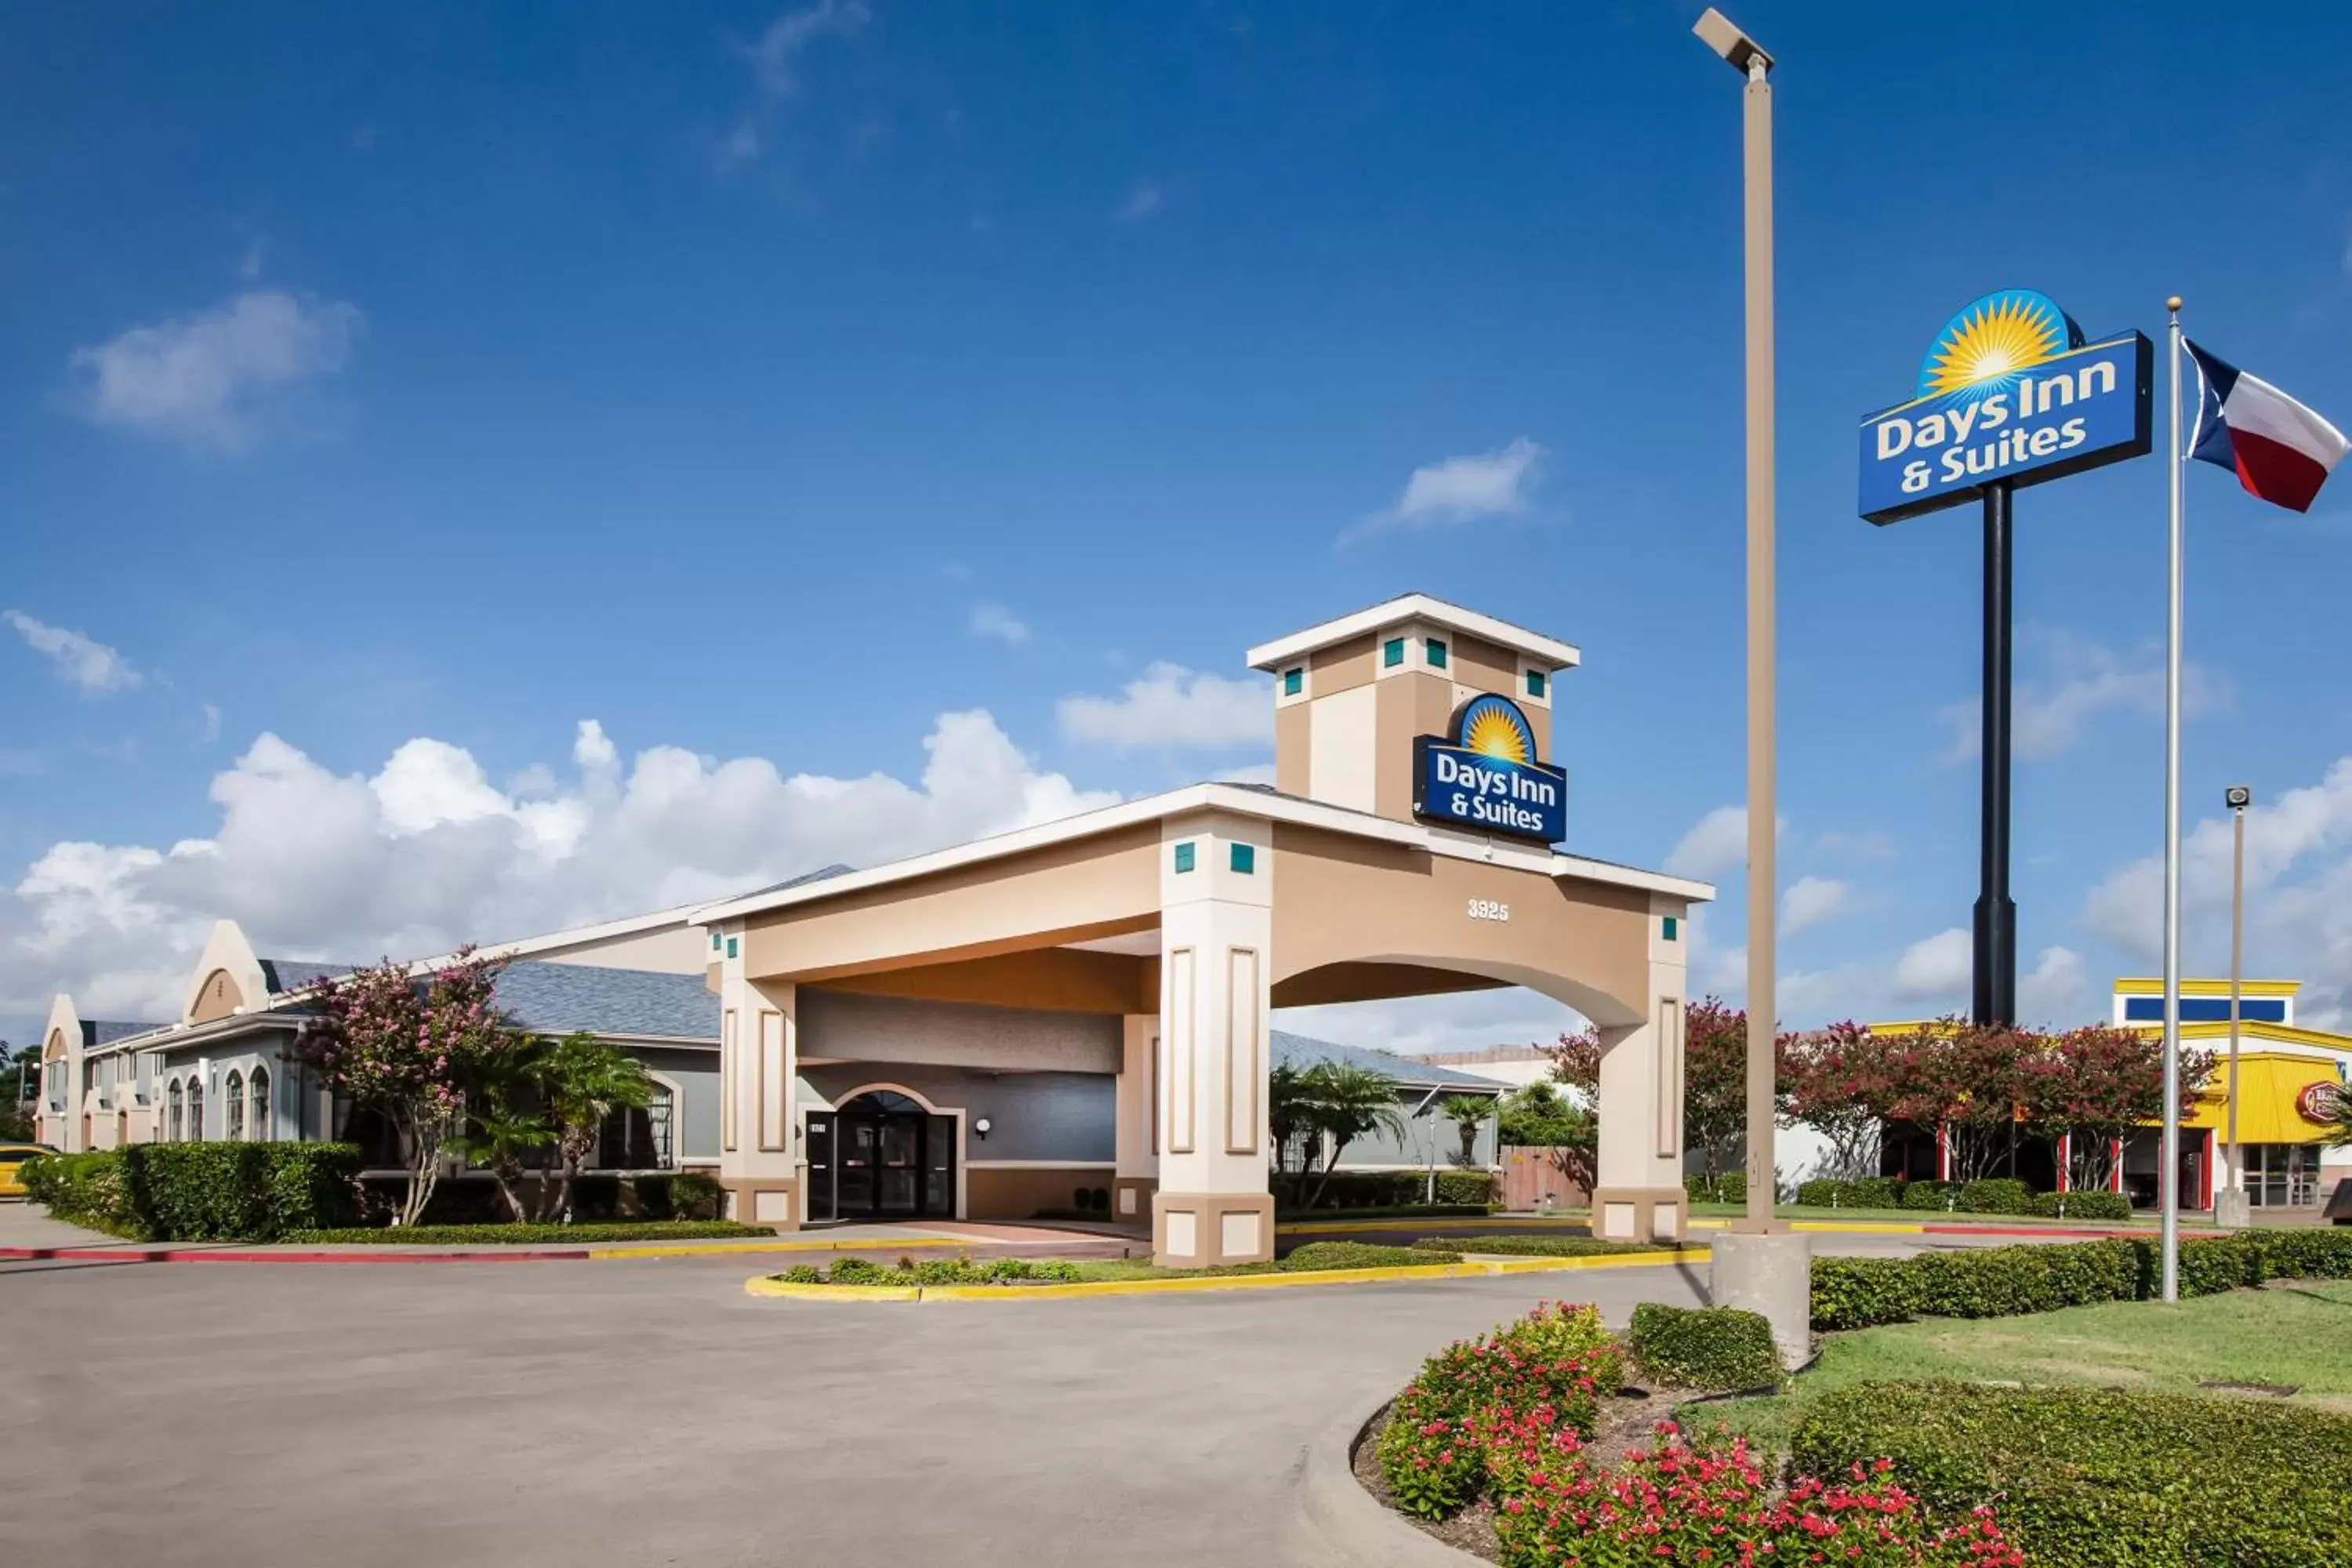 Property Building in Days Inn & Suites by Wyndham Corpus Christi Central